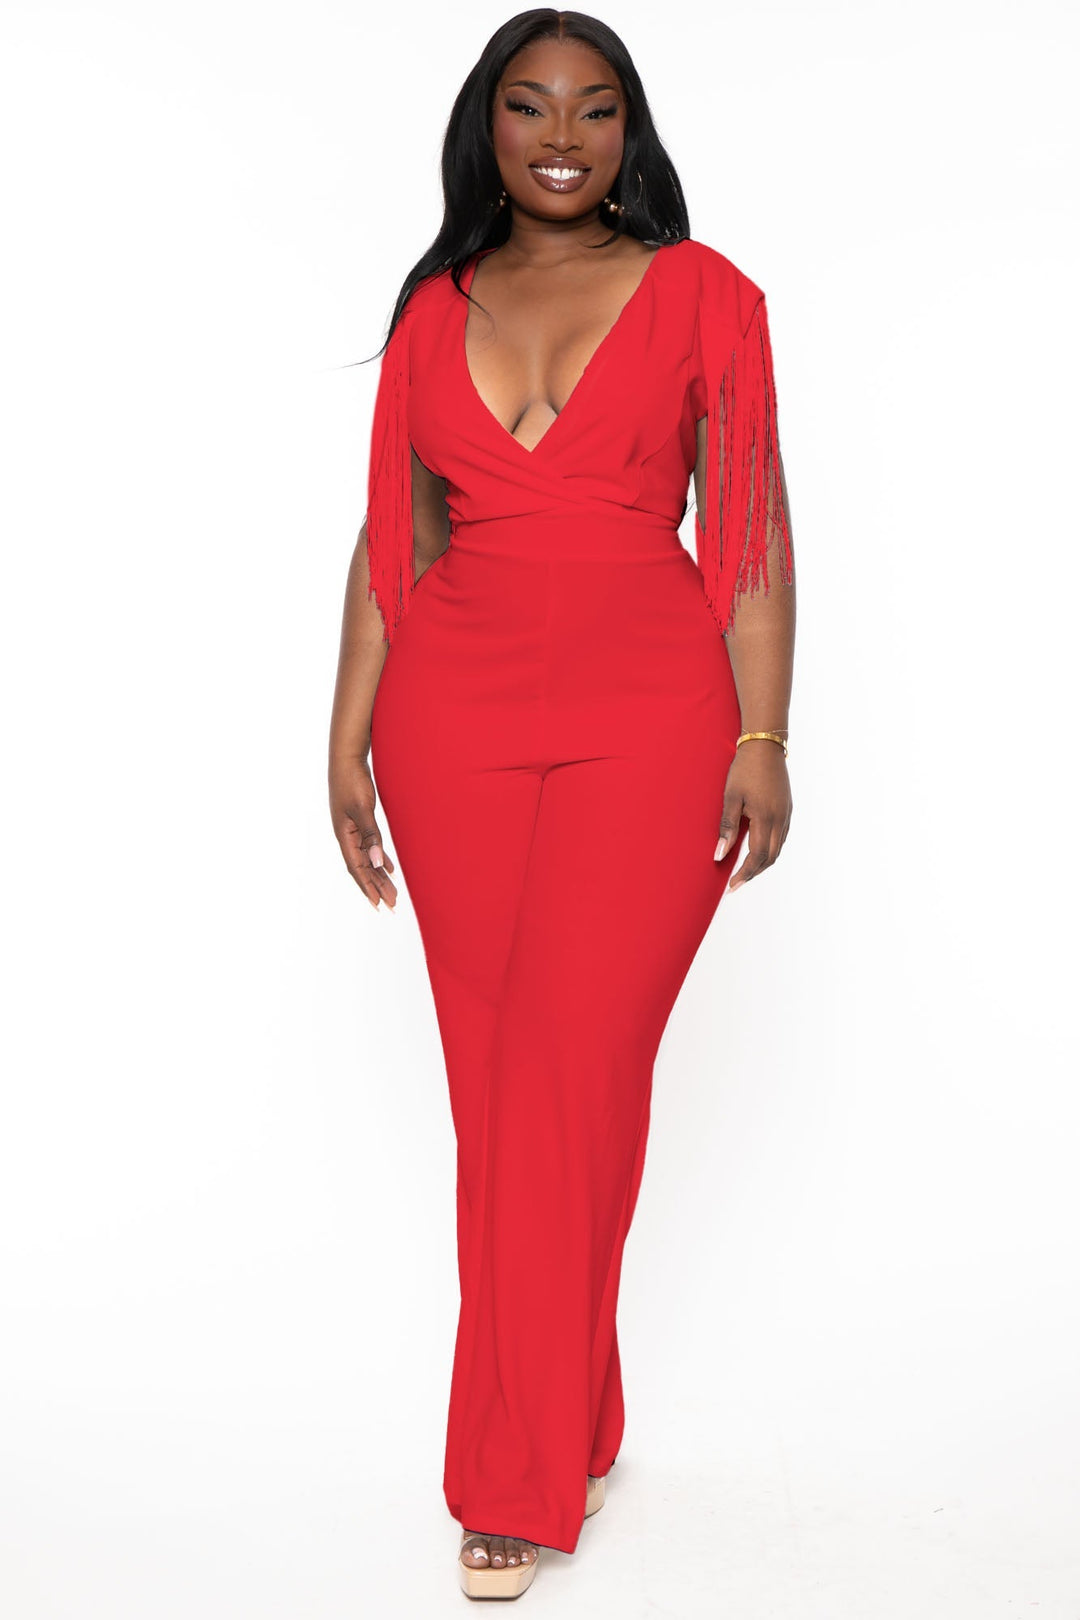 SYMPHONY Jumpsuits and Rompers 1X / Red Plus Size Lilybeth Fringe Jumpsuit -Red